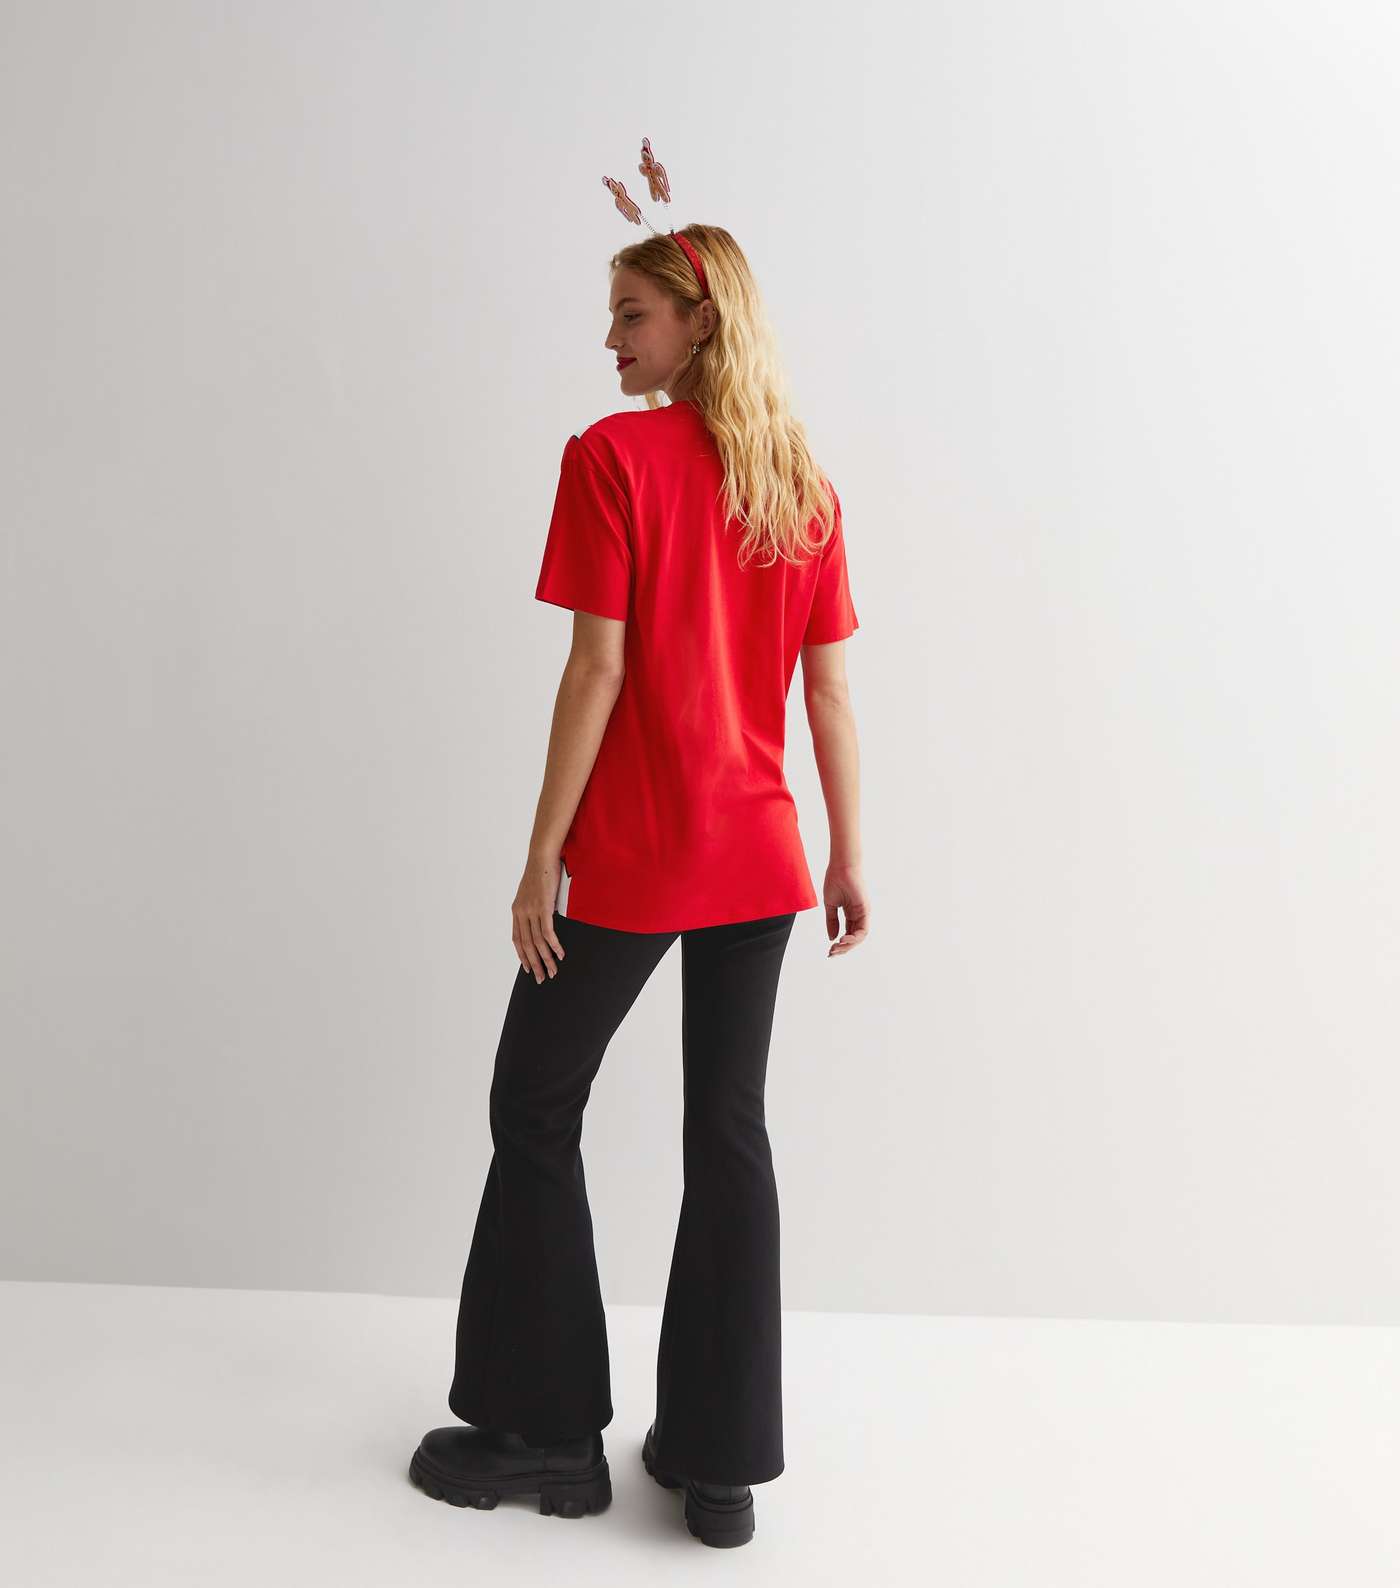 Red Mrs Claus Dress Up T-Shirt Image 4